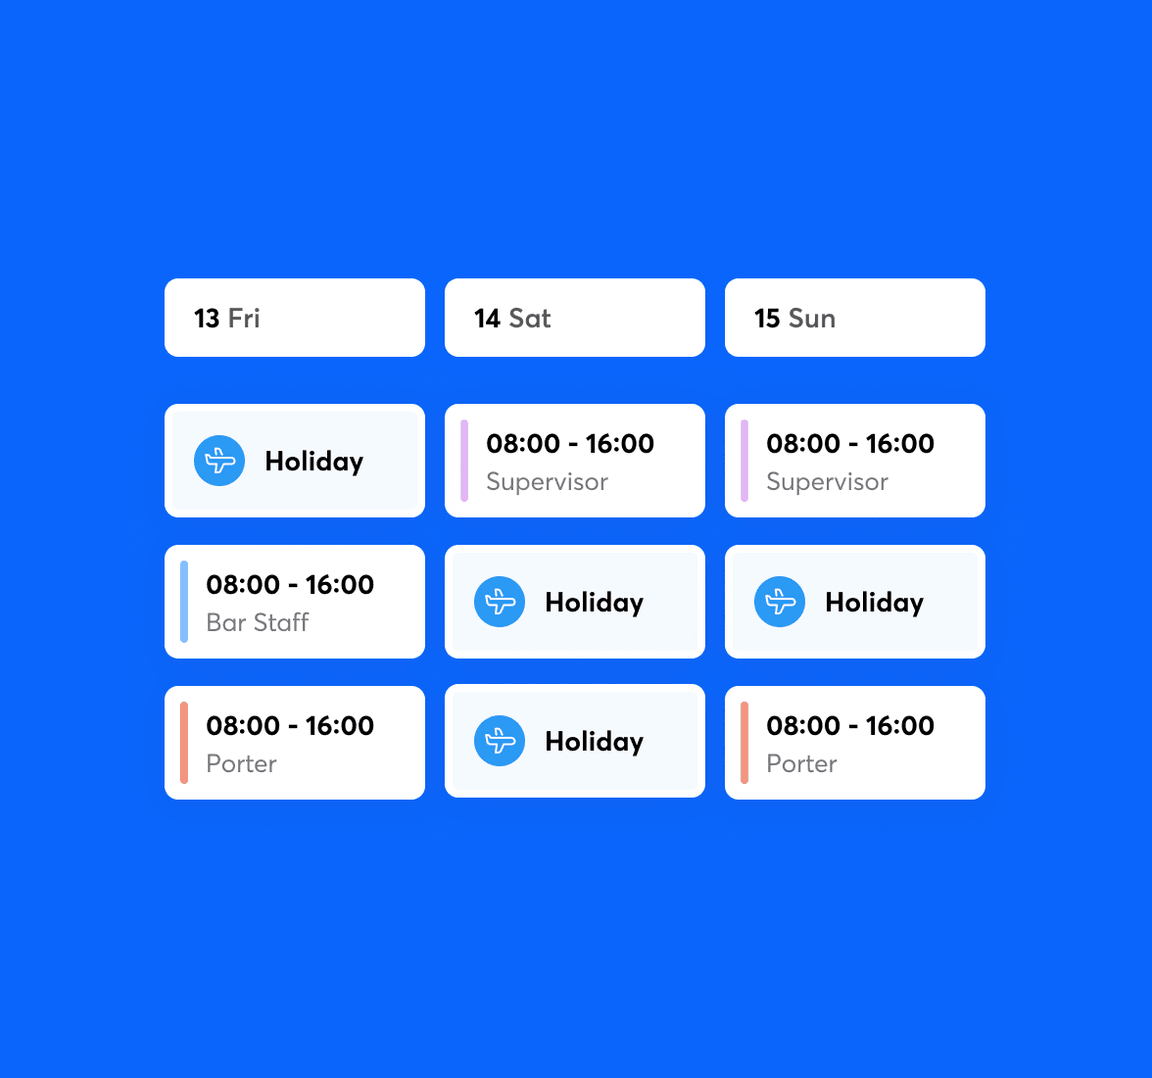 Section of a rota with holidays marked with blue plane icons.